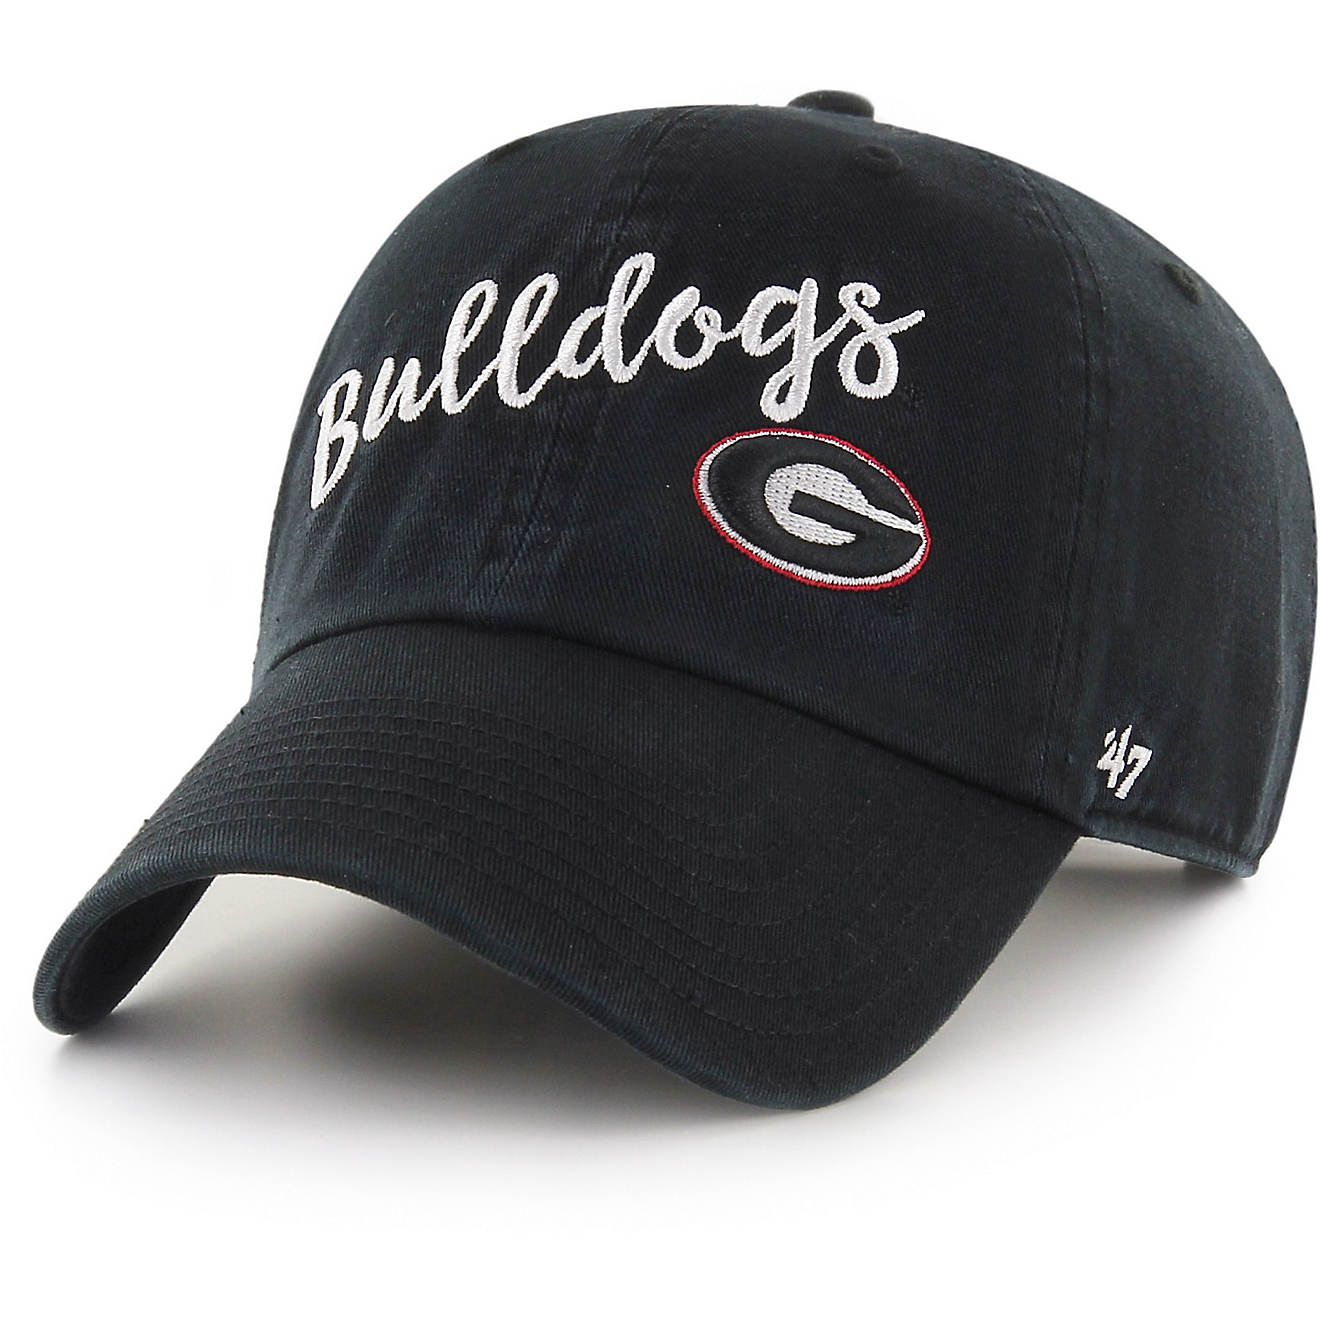 '47 University of Georgia Primary Script Clean Up Ball Cap                                                                       - view number 1